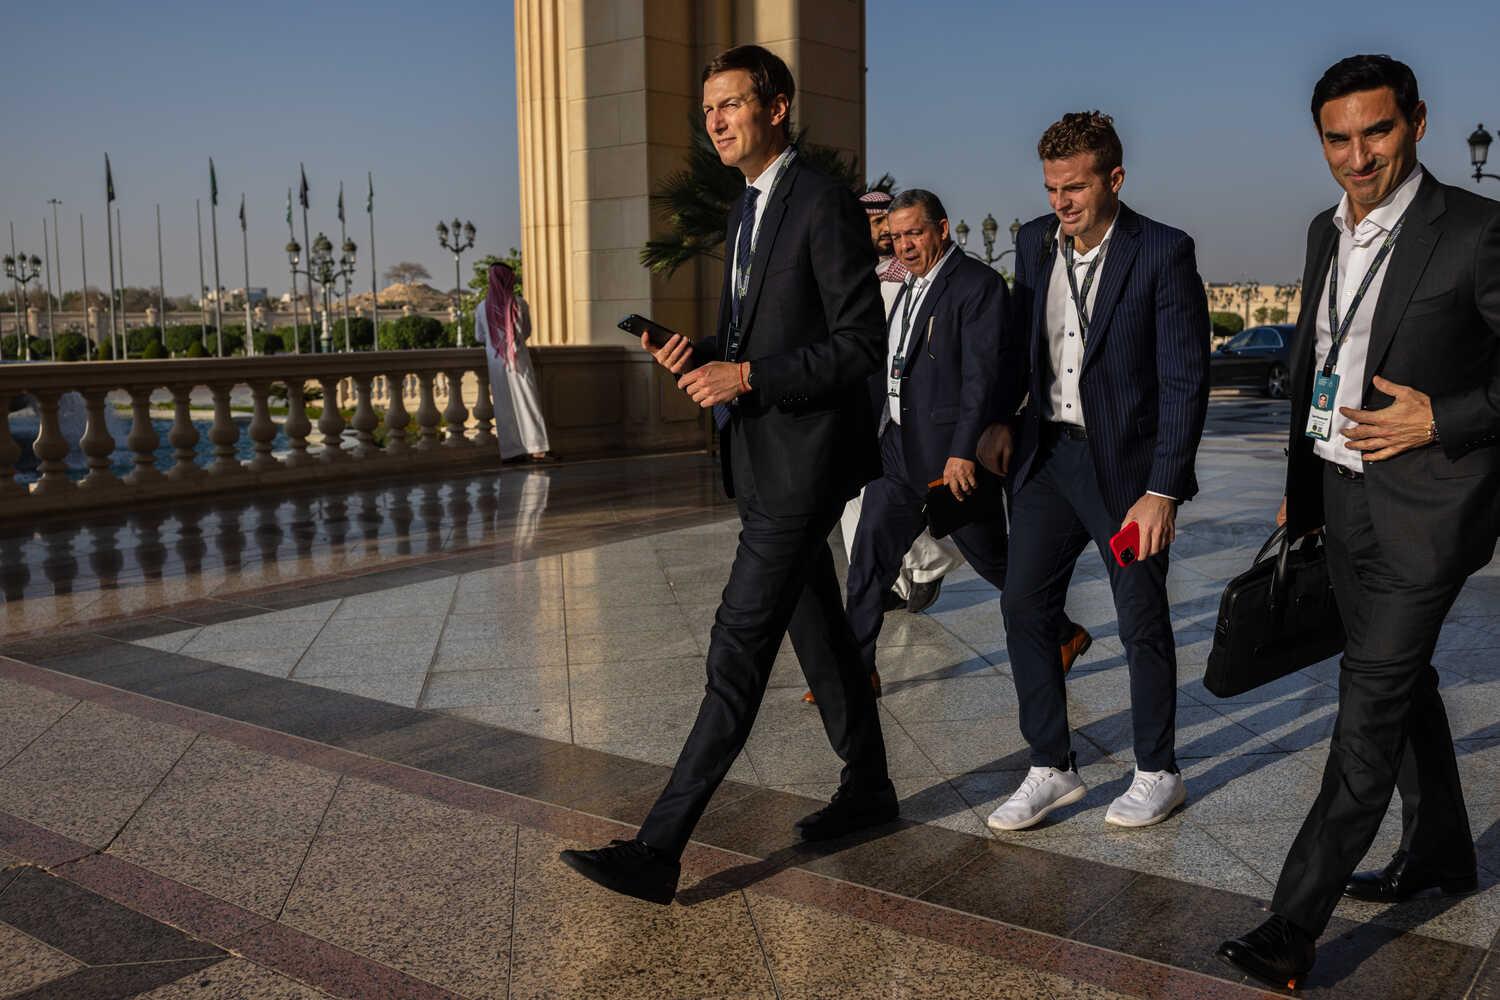 Jared Kushner wearing a suit and walking with a group of other men at a fancy hotel in Saudi Arabia.